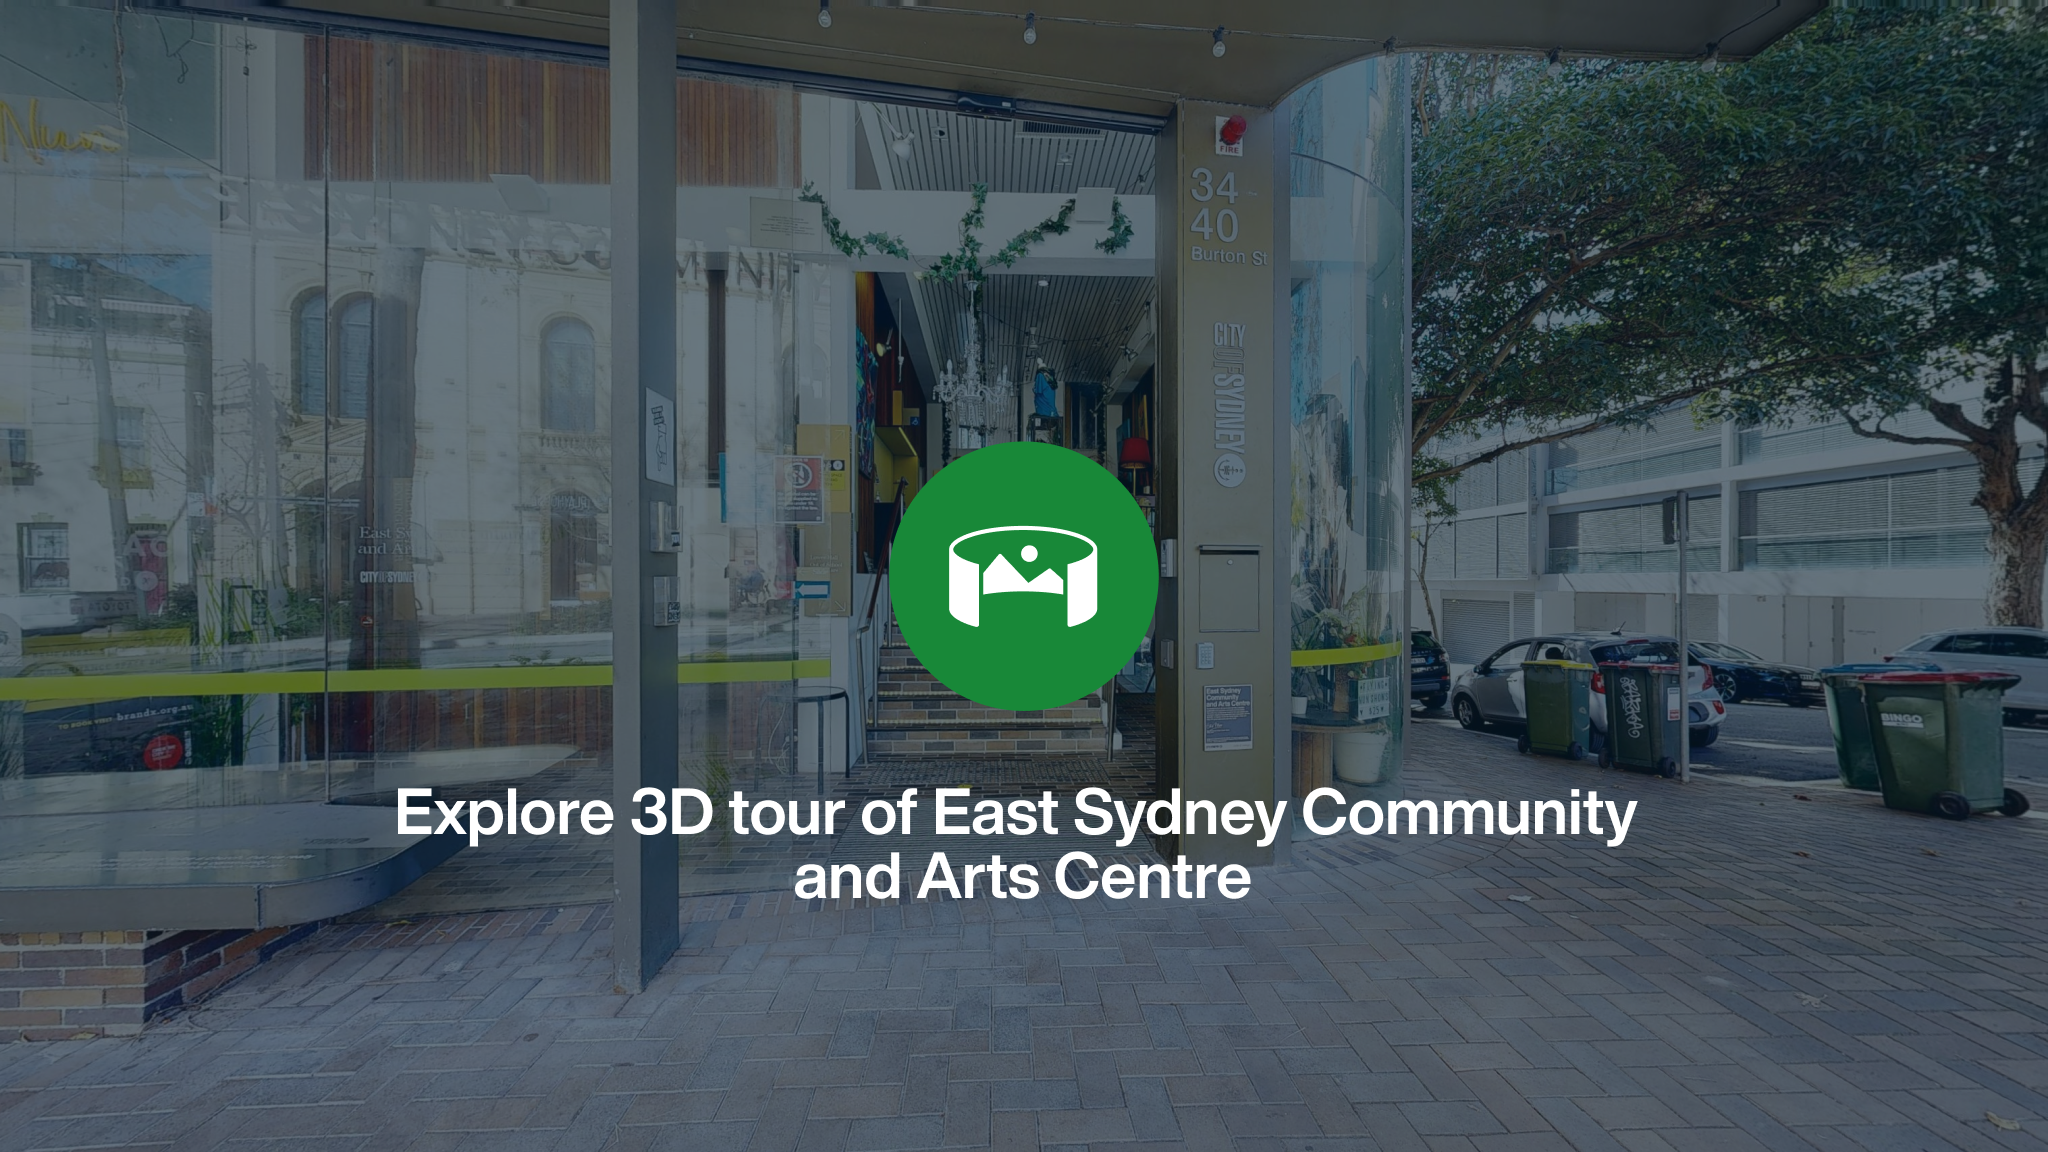 The front entrance to East Sydney Community and Arts Centre overlayed with a green icon and the words Explore 3D tour of East Sydney Community and Arts Centre.